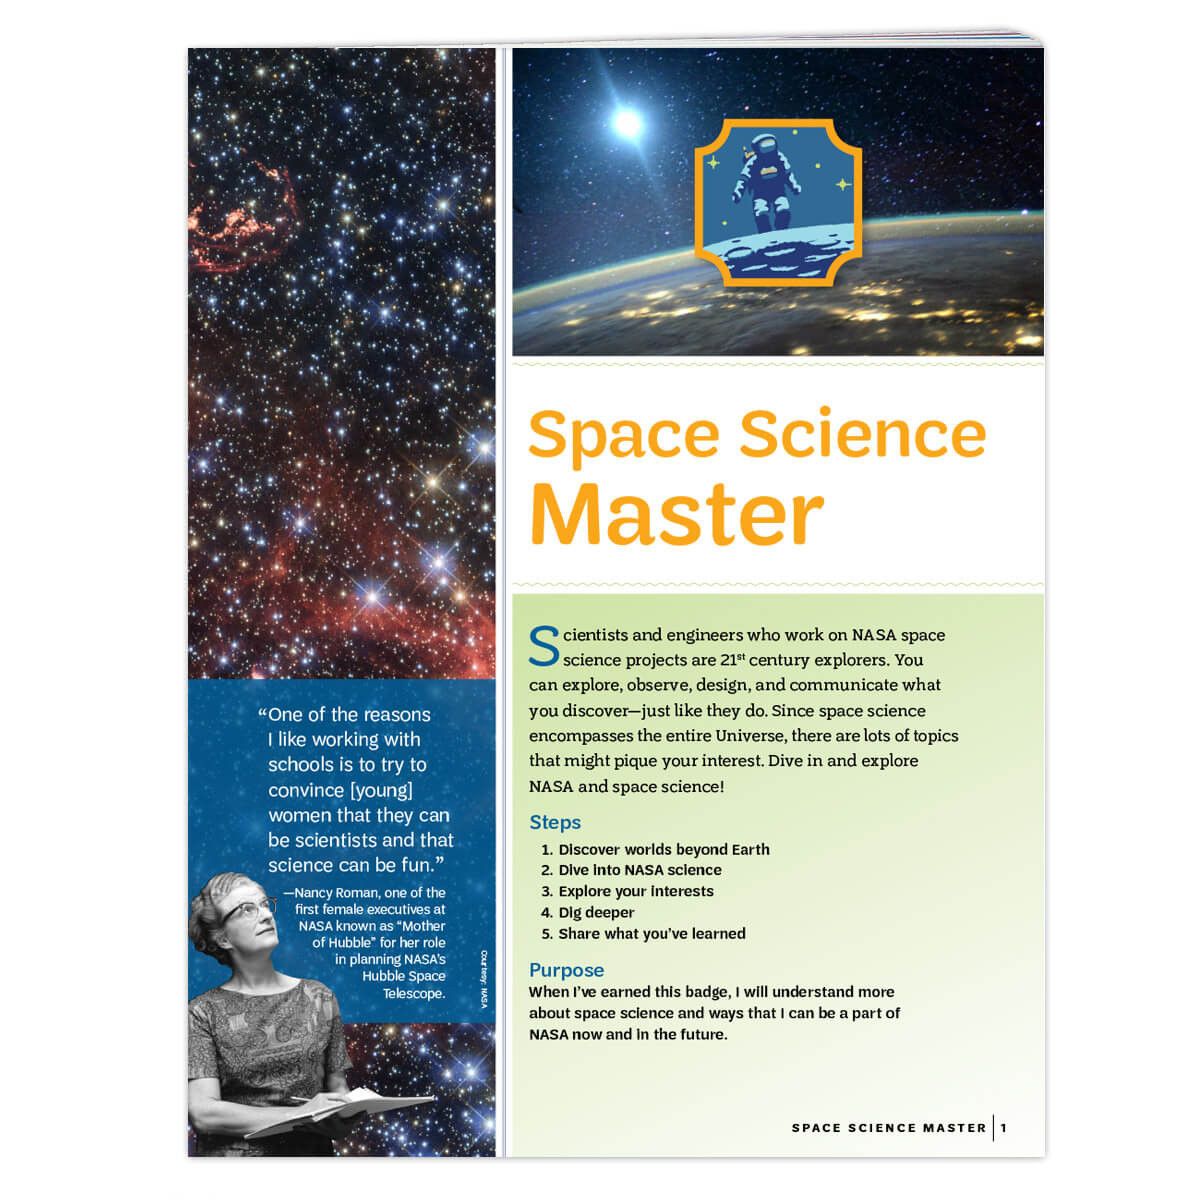 Amb. Space Science Master REQ